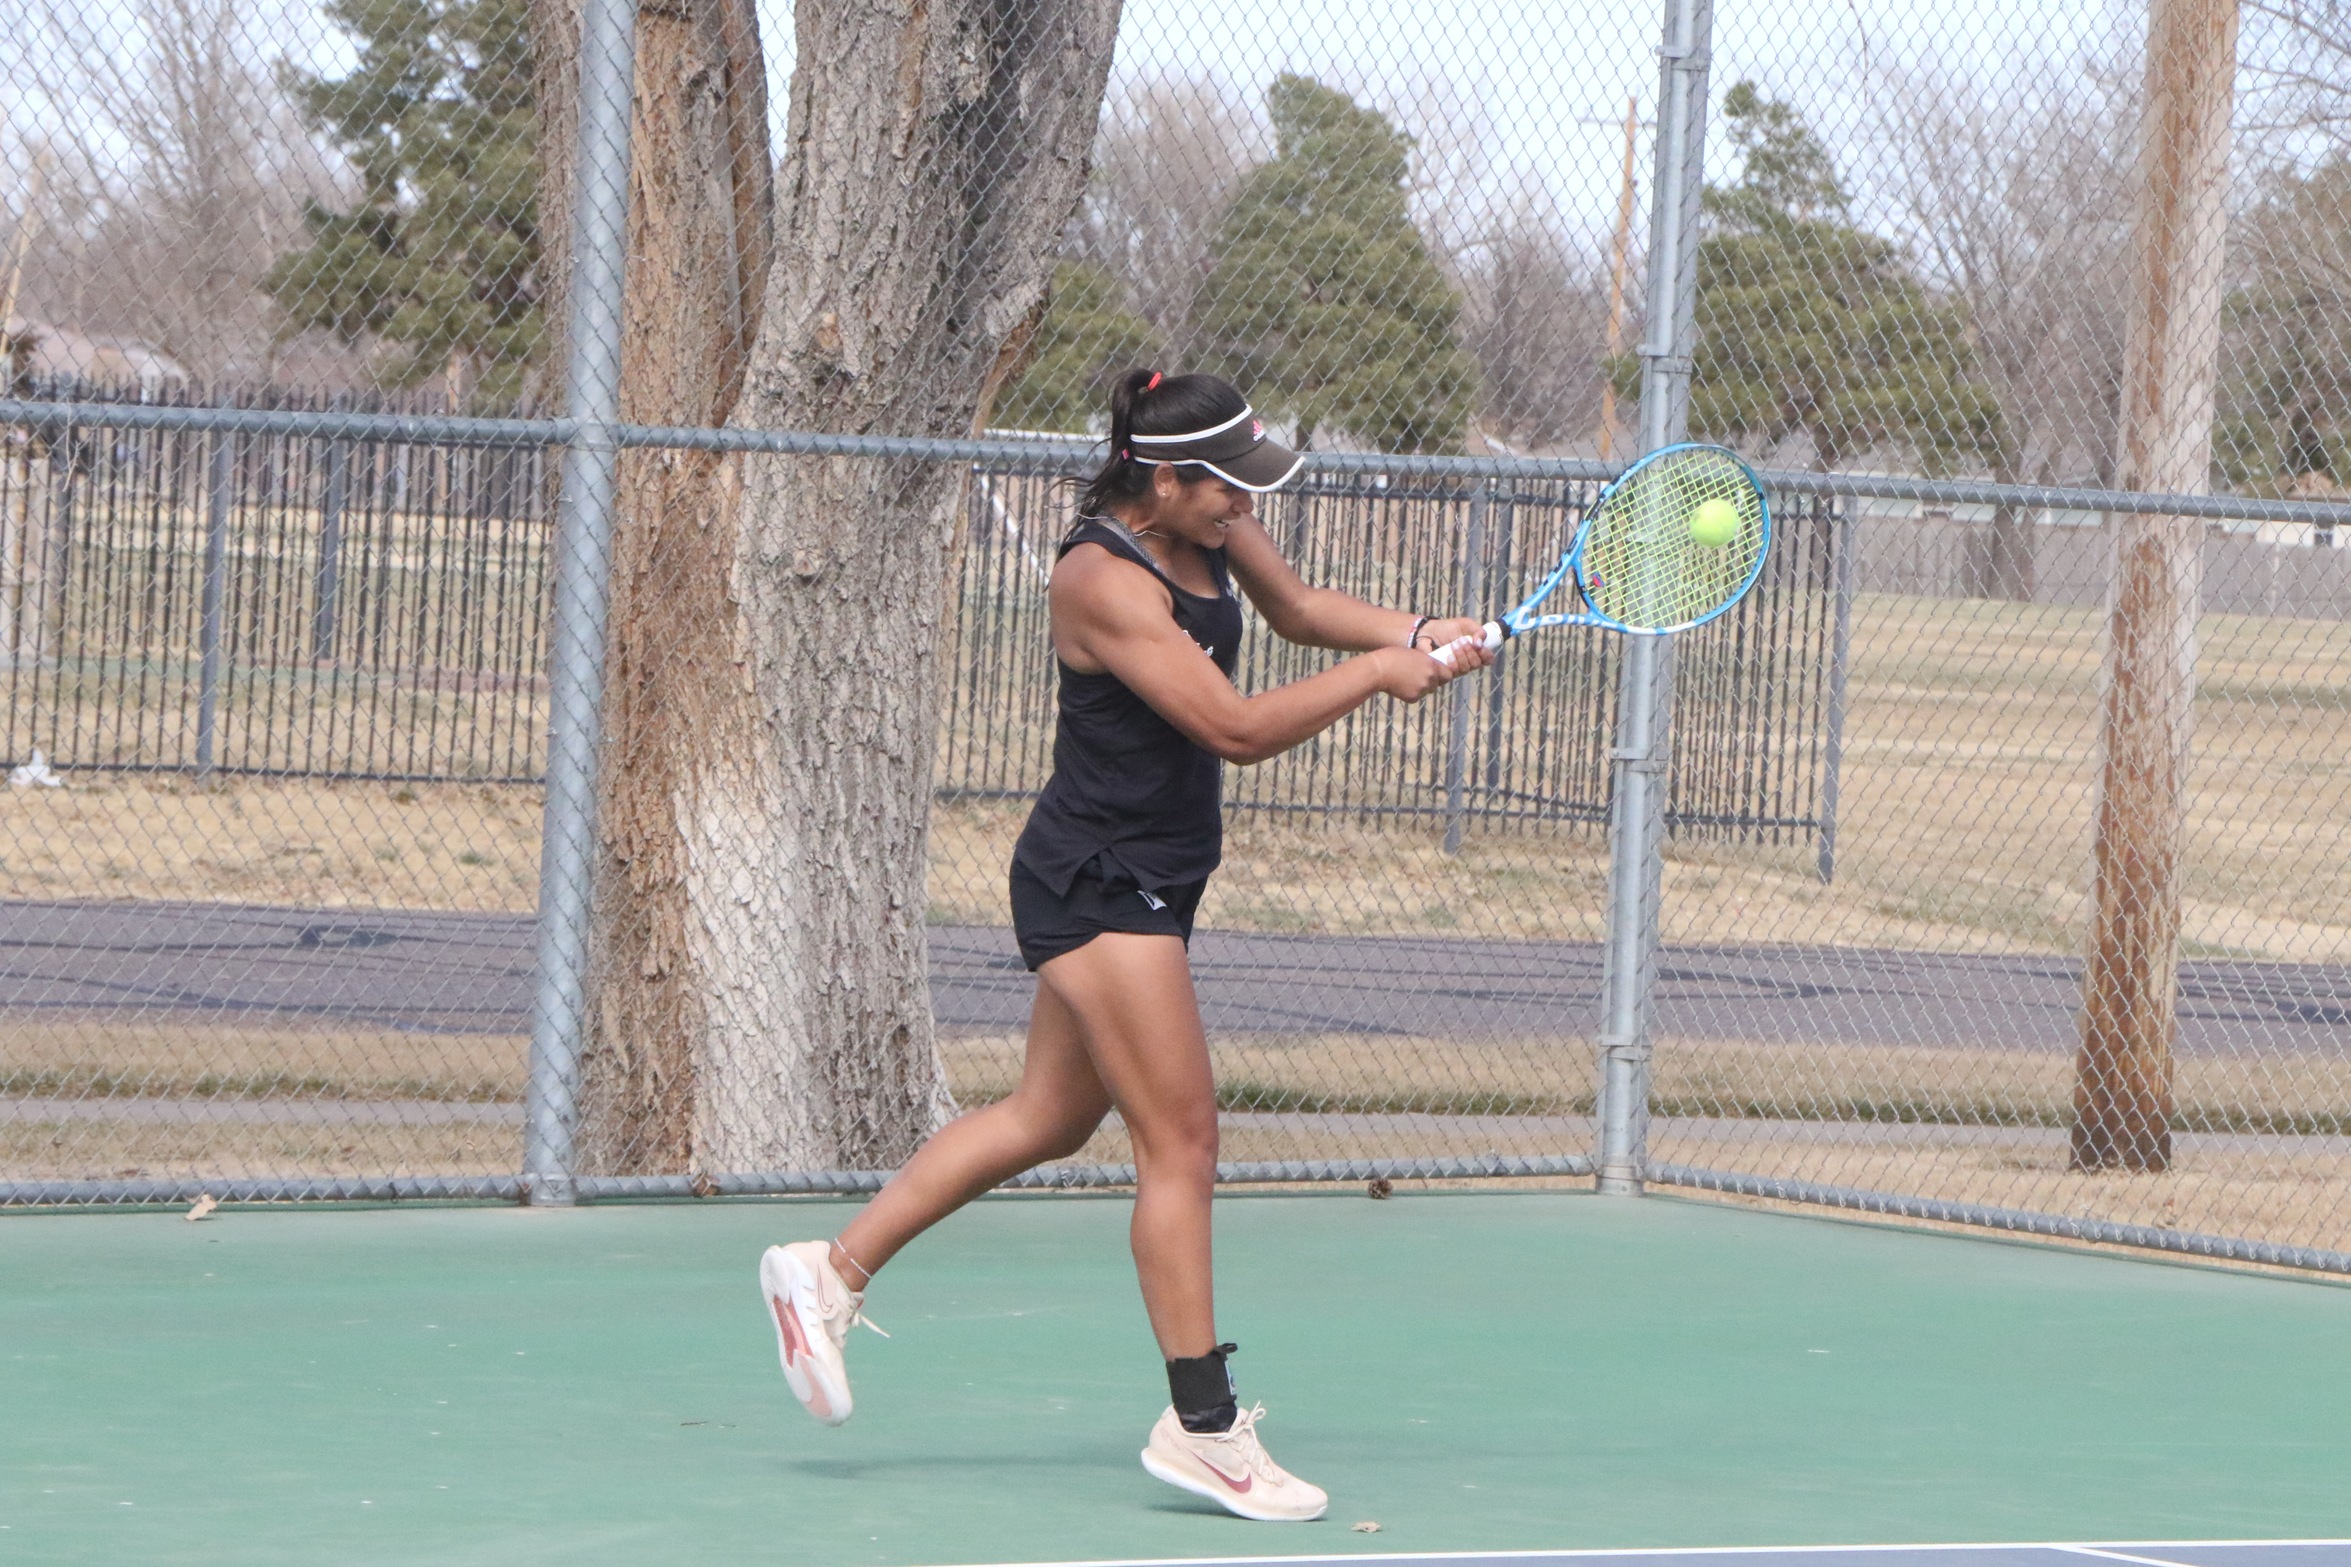 Seward County qualifies 5 for the finals of the Region VI Tennis Championship